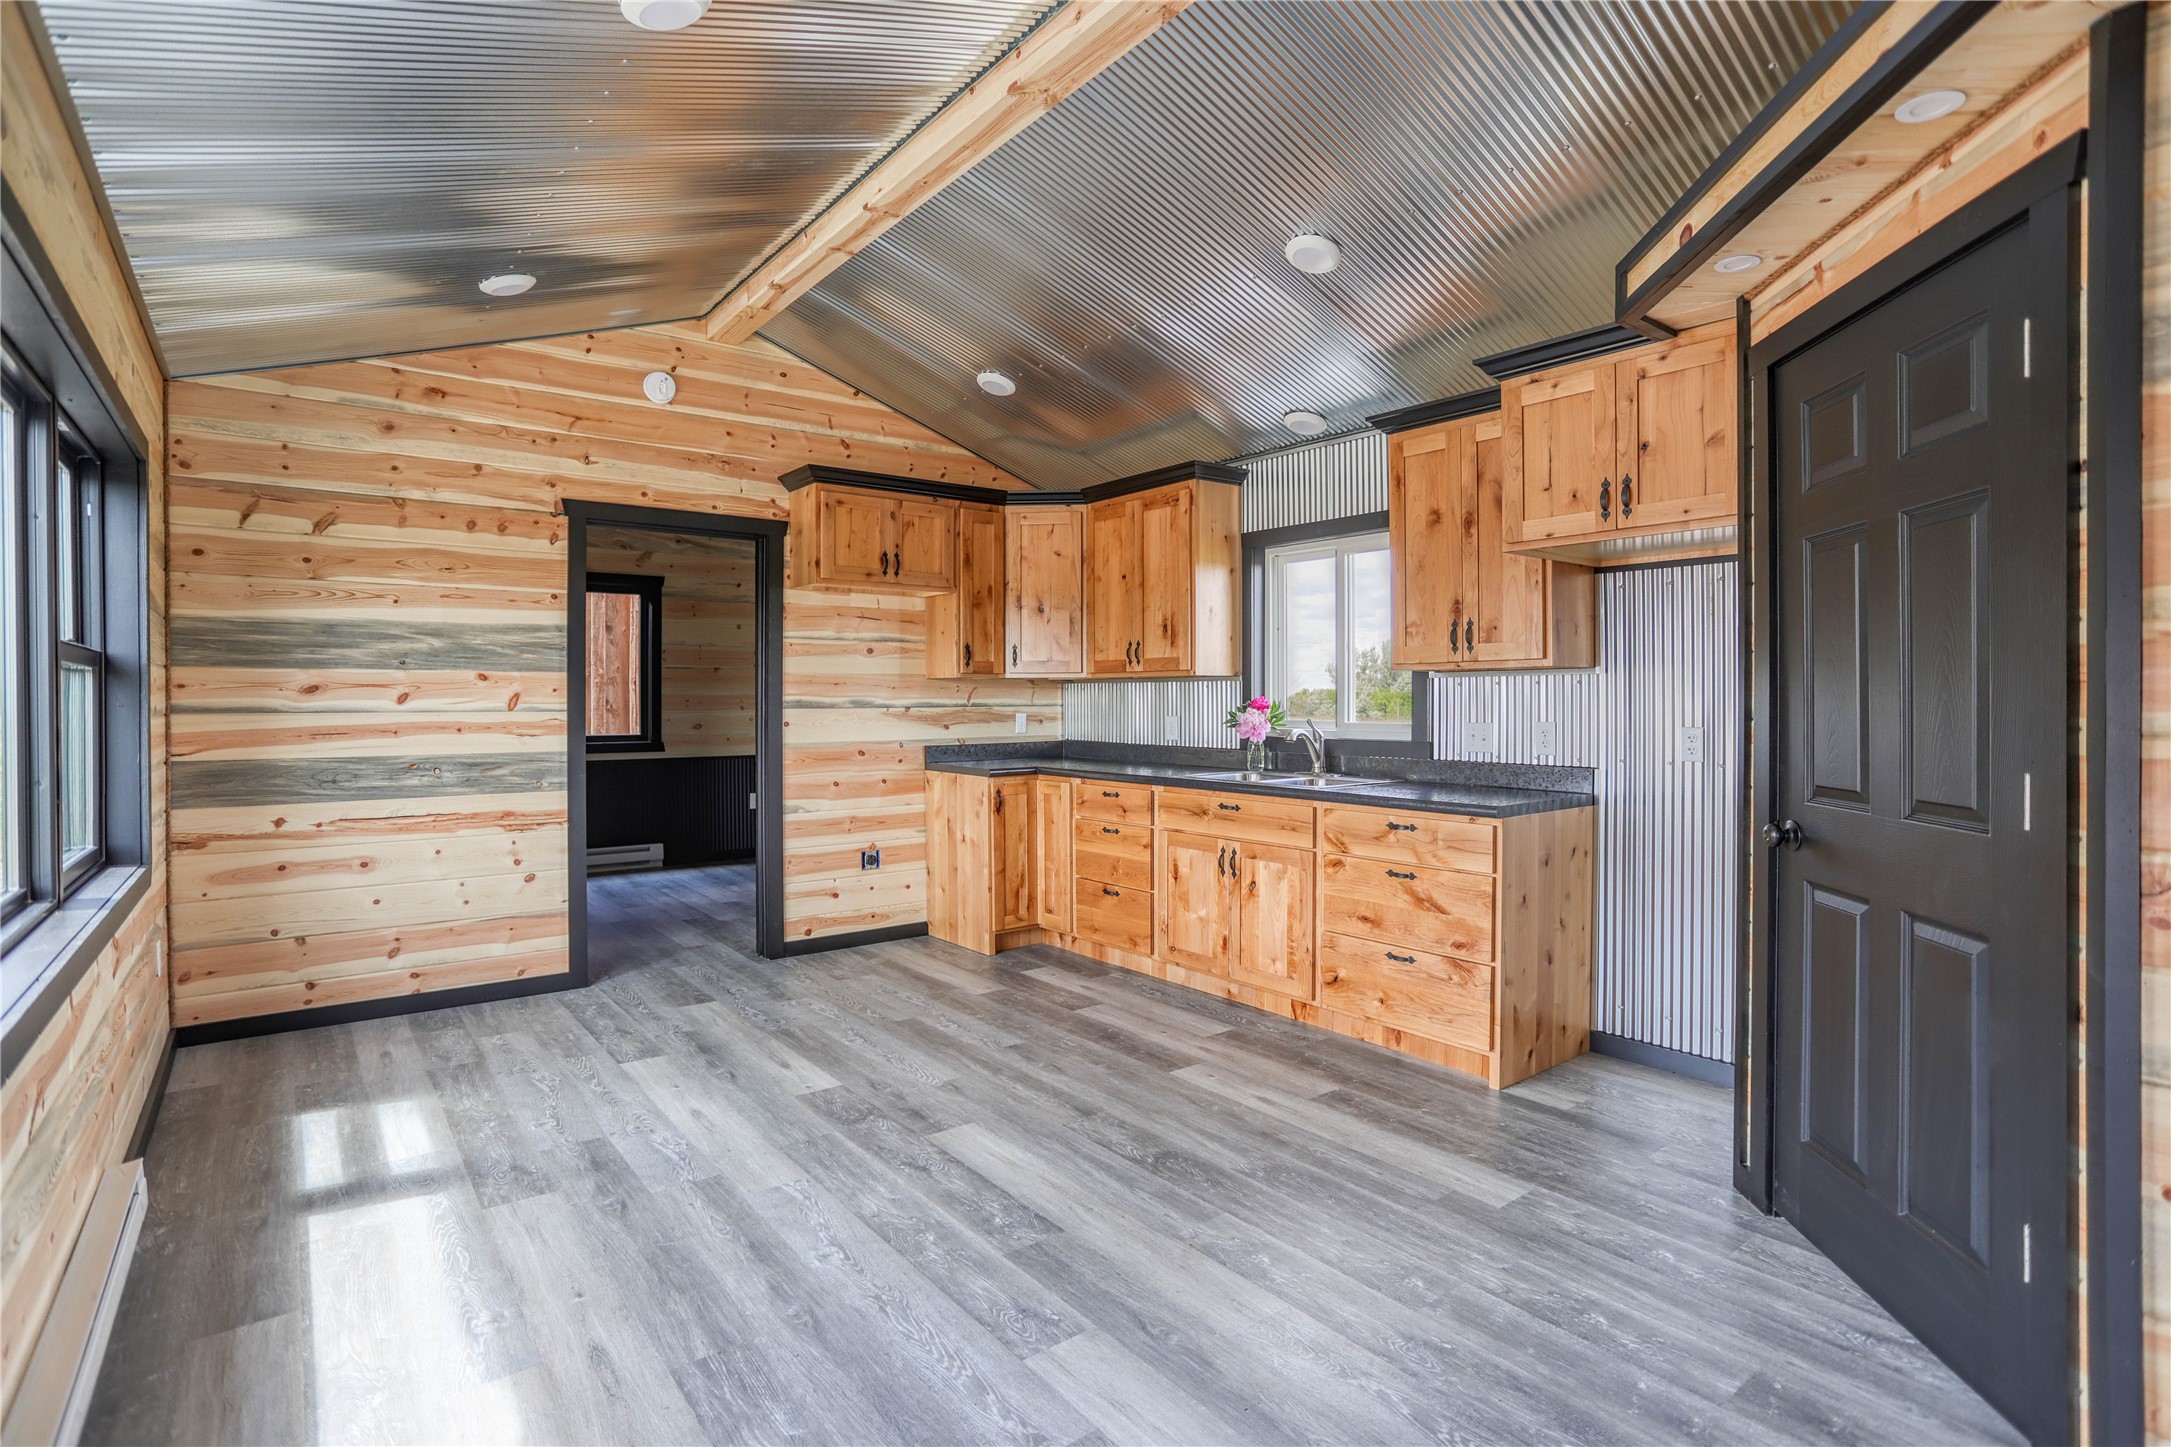 Brand NEW, 2023 custom cabin built with rough hewn Douglas Fir siding cut locally at Big Sky Sawmill.  Beautiful craftsmanship is evident in the hand fired finish.  Inside features blue pine tongue and groove from floor to vaulted ceiling, corrugated metal details, and kitchen cabinetry made by Intermountain Custom Kitchens.  Make this your private mountain retreat, perfect hunting cabin, hired-hand lodging, detached mother in law suite, or simple Airbnb!  Cabin only.  Must be moved from site.  Listed by Jen Barnett.